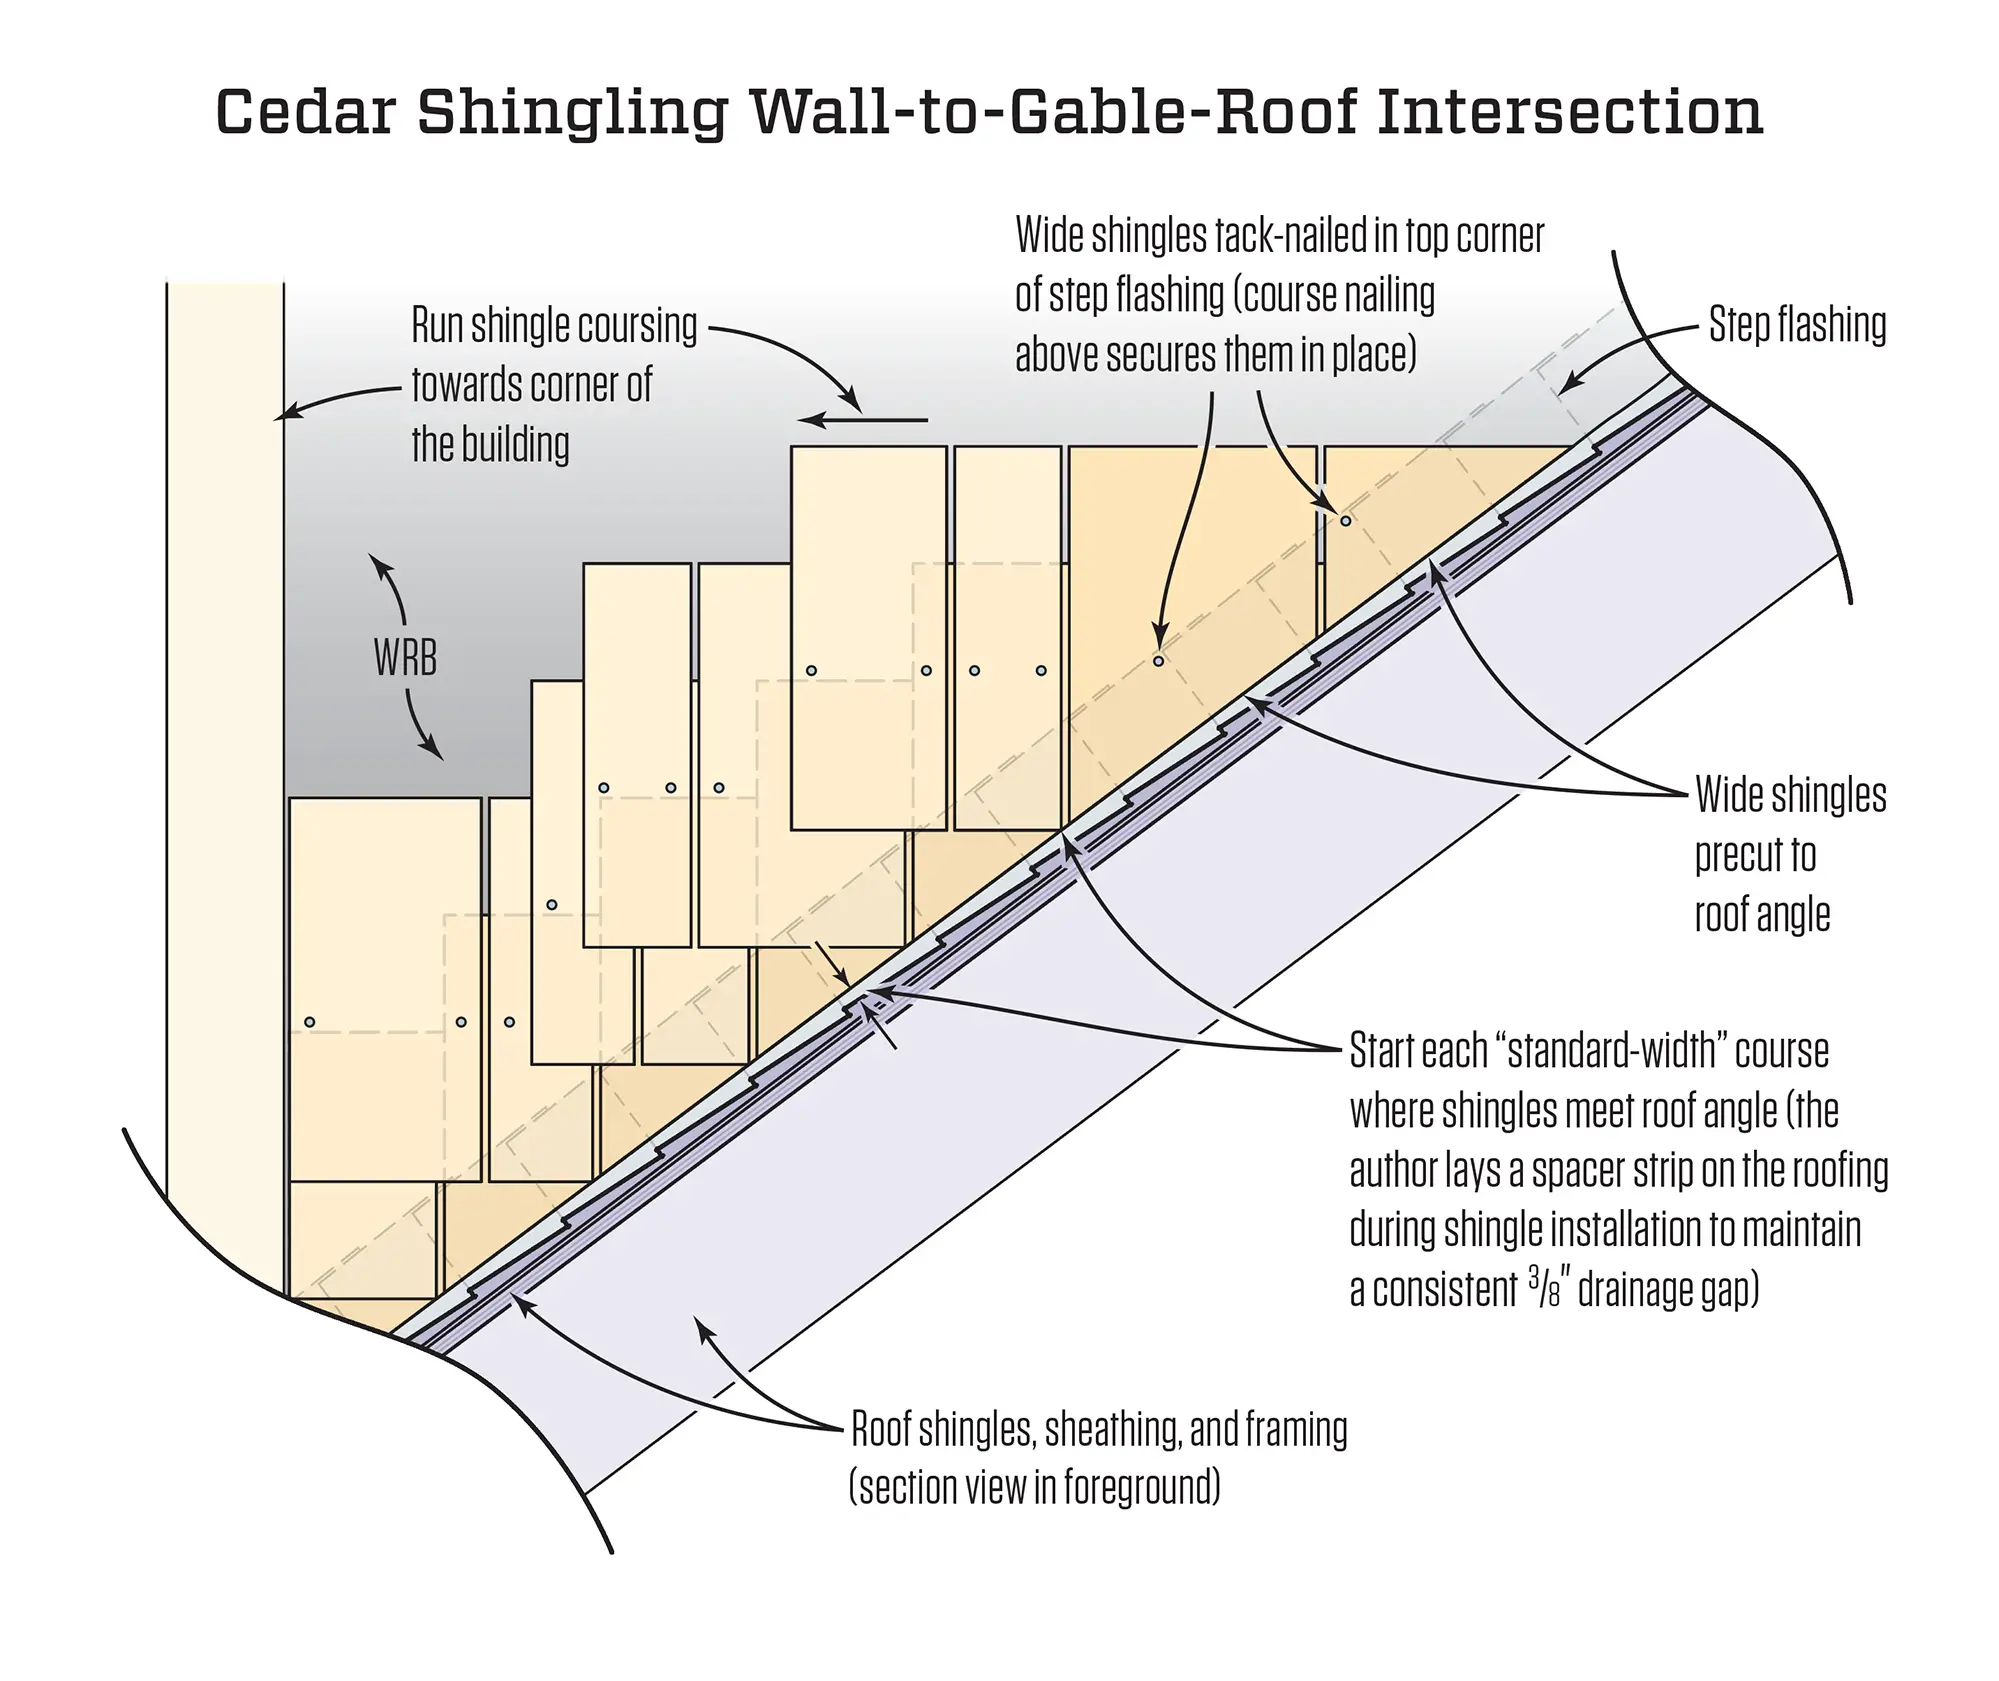 Cedar Shingles at a Wall/Roof Intersection